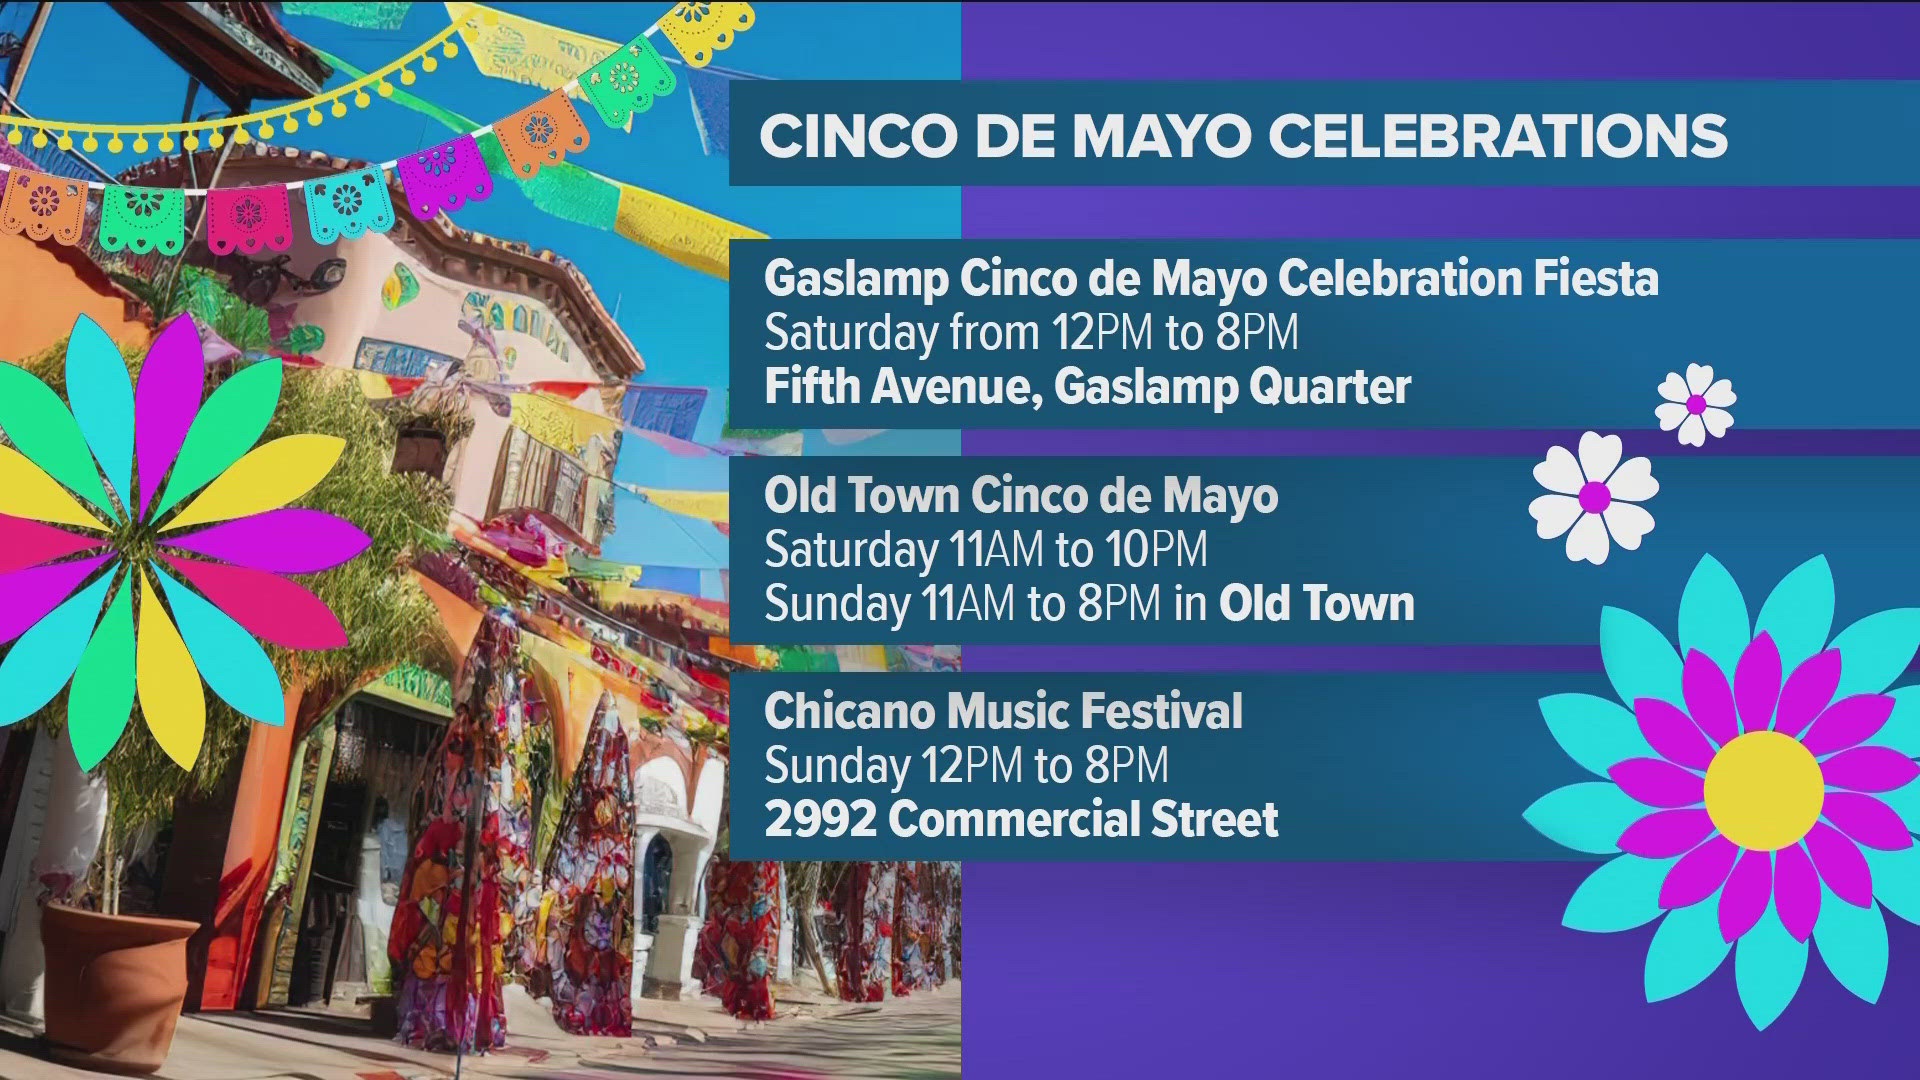 Preparations are underway throughout San Diego for Cinco de Mayo festivities.